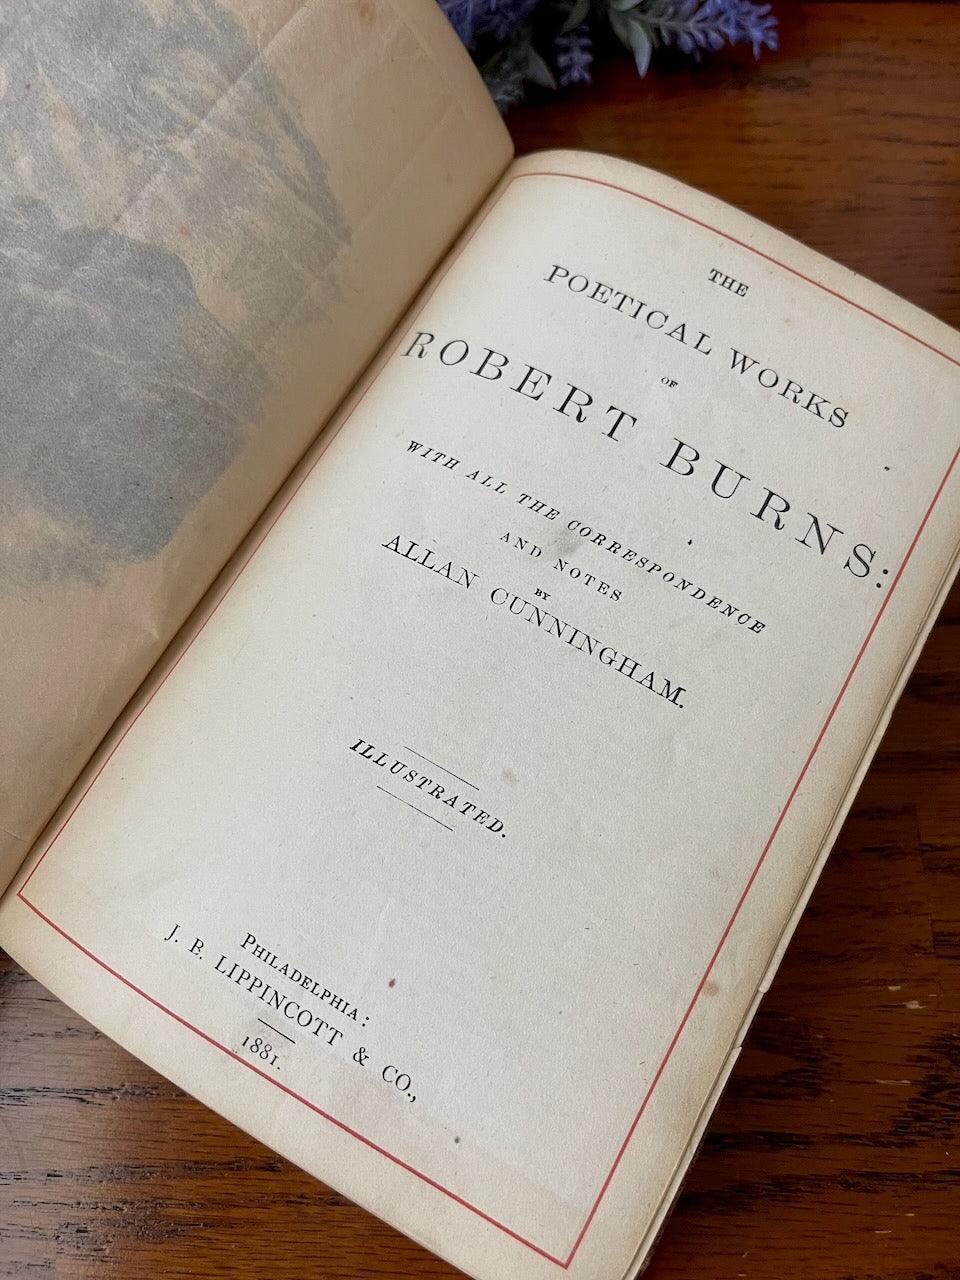 The Poetical Works of Robert Burns / 1881 - Precious Cache